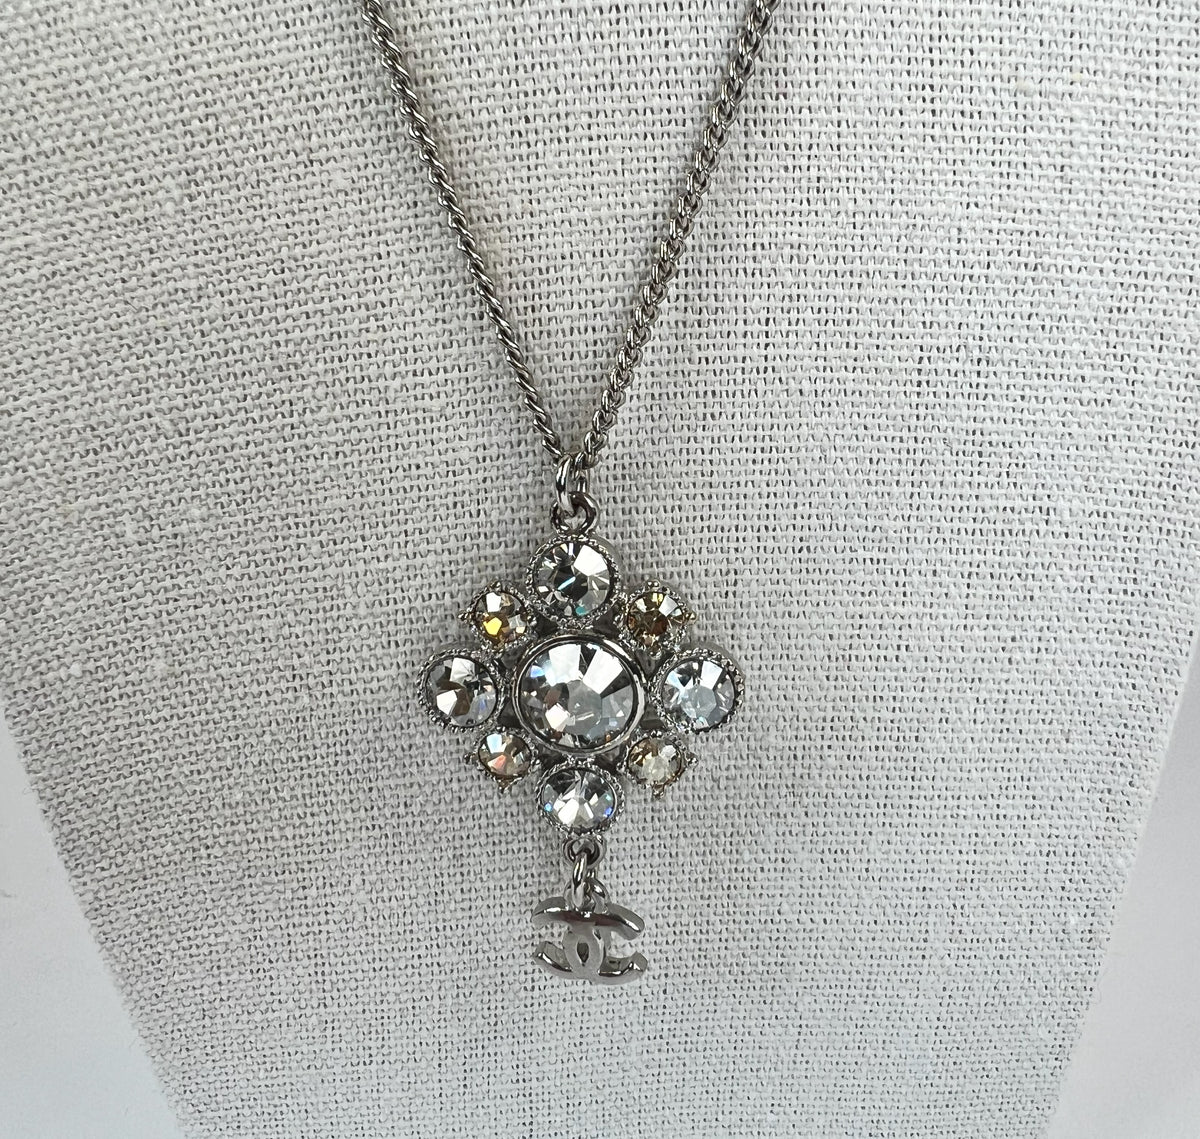 Excellent Pre-Loved Silver Tone Metal with White and Light Yellow Crystal Embellished Floral Pendant Drop Necklace. (close up)